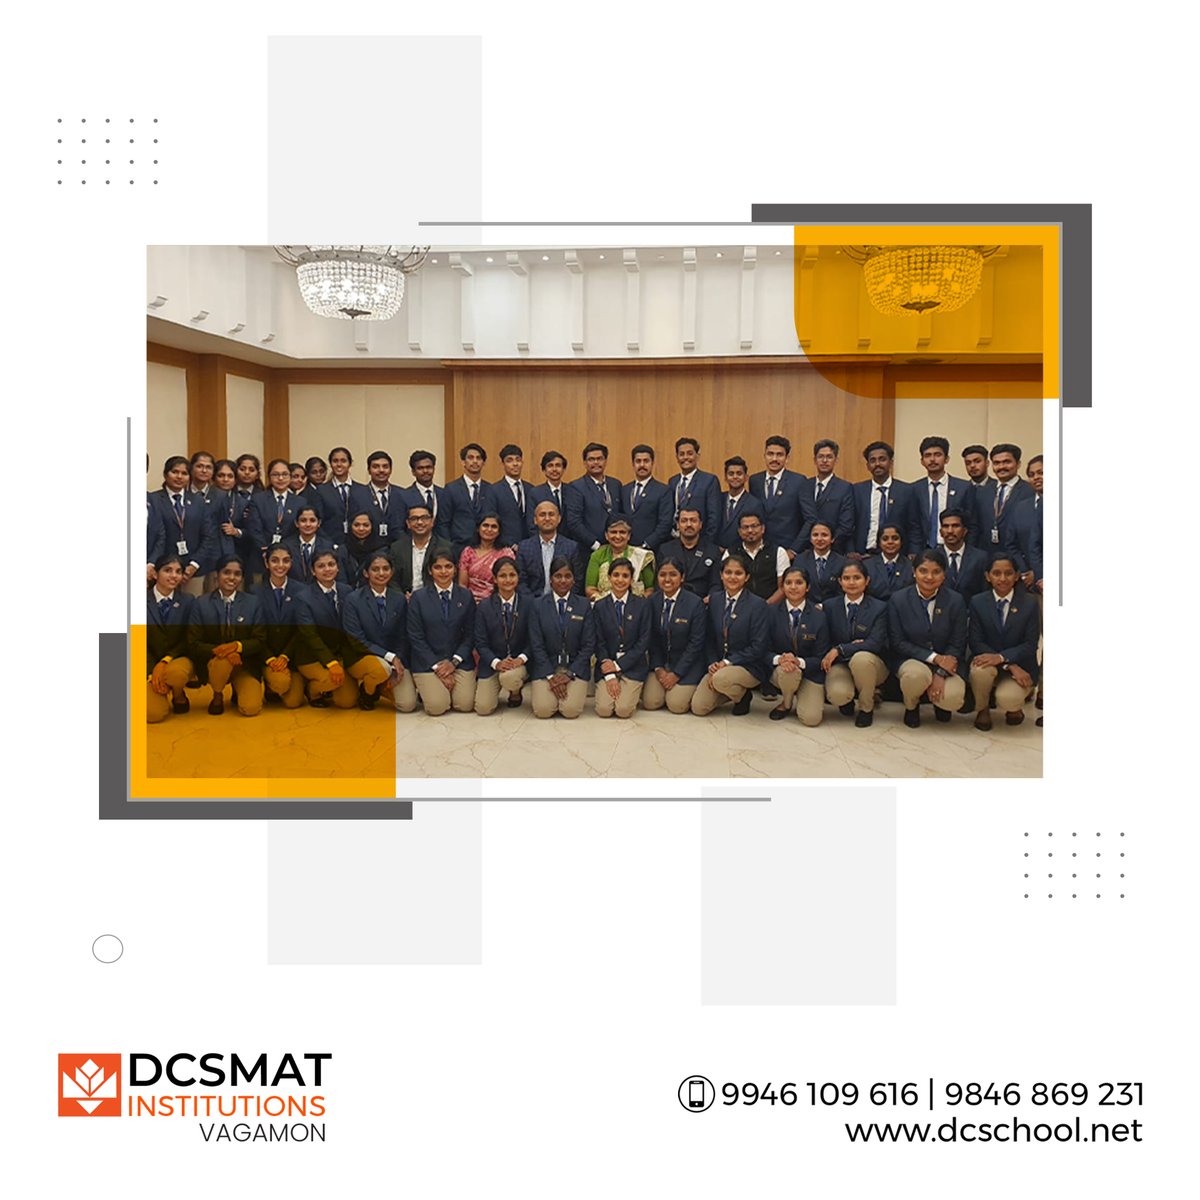 Elevating the MBA '22 Journey with a Dash of Sophistication! 🍽️ Fine Dining Experience at Holiday Inn, Cochin on September 30th - A Memorable Part of Placement Training. 🎓🌟

#dcsmat #vagamon #MBA22 #FineDining #PlacementTraining #HolidayInnCochin